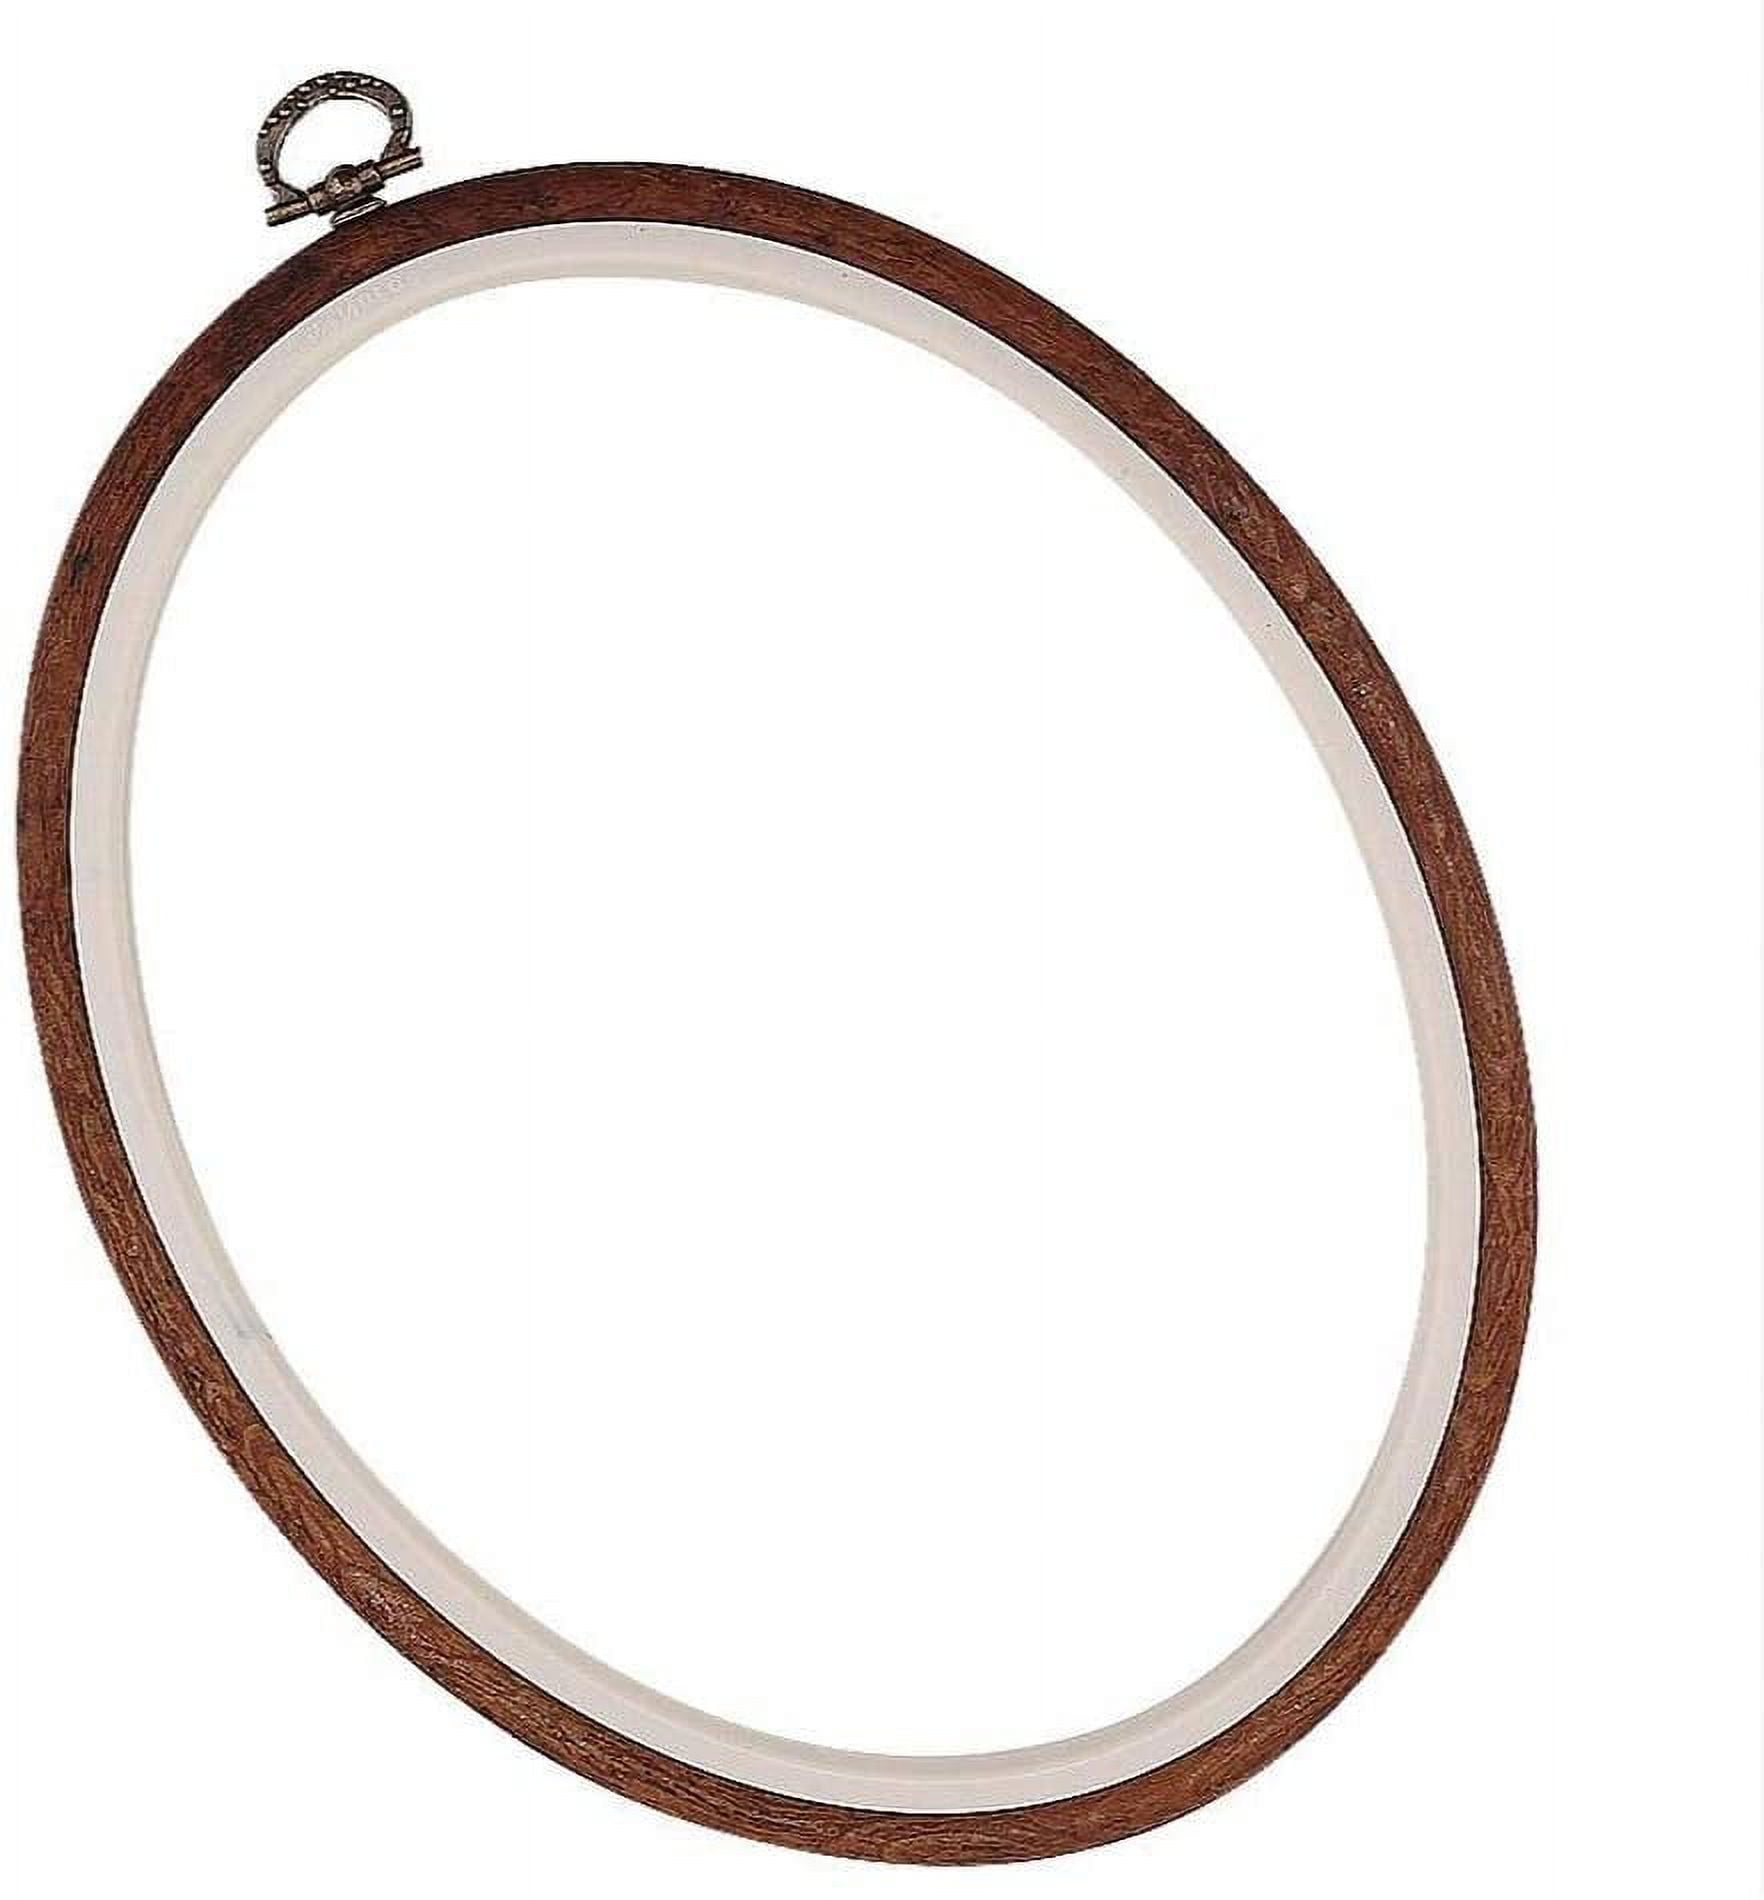 Oval Embroidery Frame - 5 x 3.75